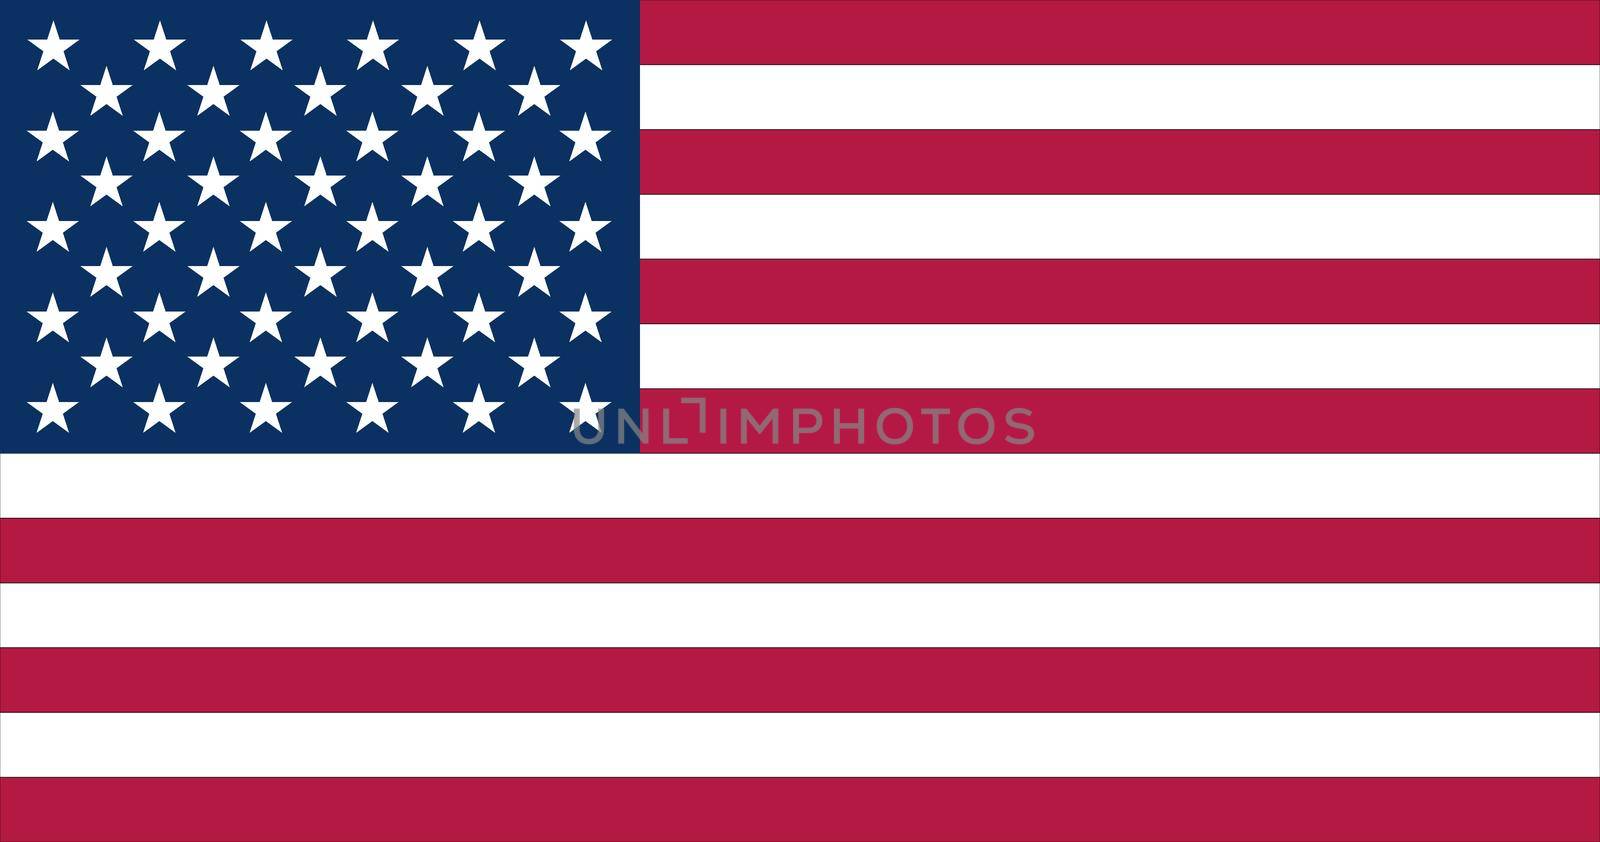 American flag vector illustration. National flag of the United States of America. The Stars and Stripes. The Star-Spangled Banner. USA flag emblem. 4th of July background. National symbol and ensign. by Fahroni